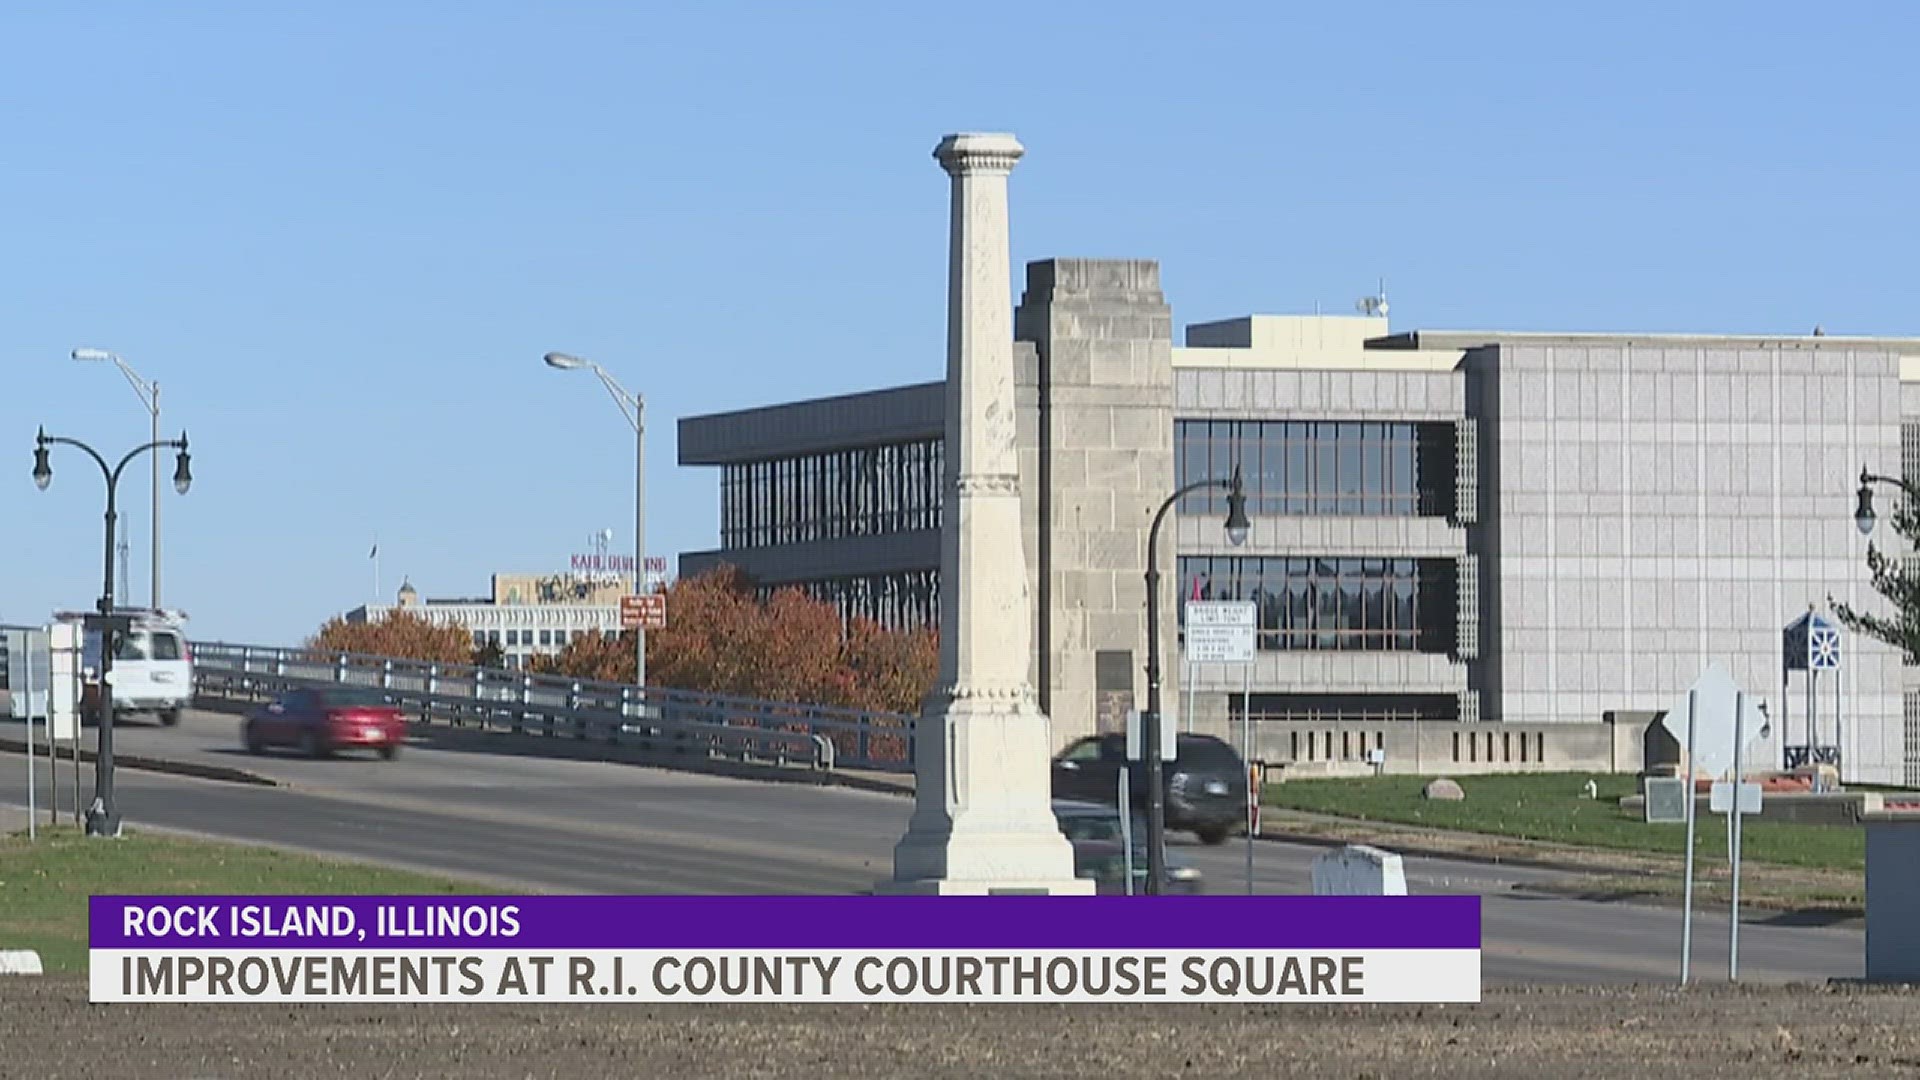 Officials say they hope to also incorporate stones saved from the old courthouse into the new courtyard.